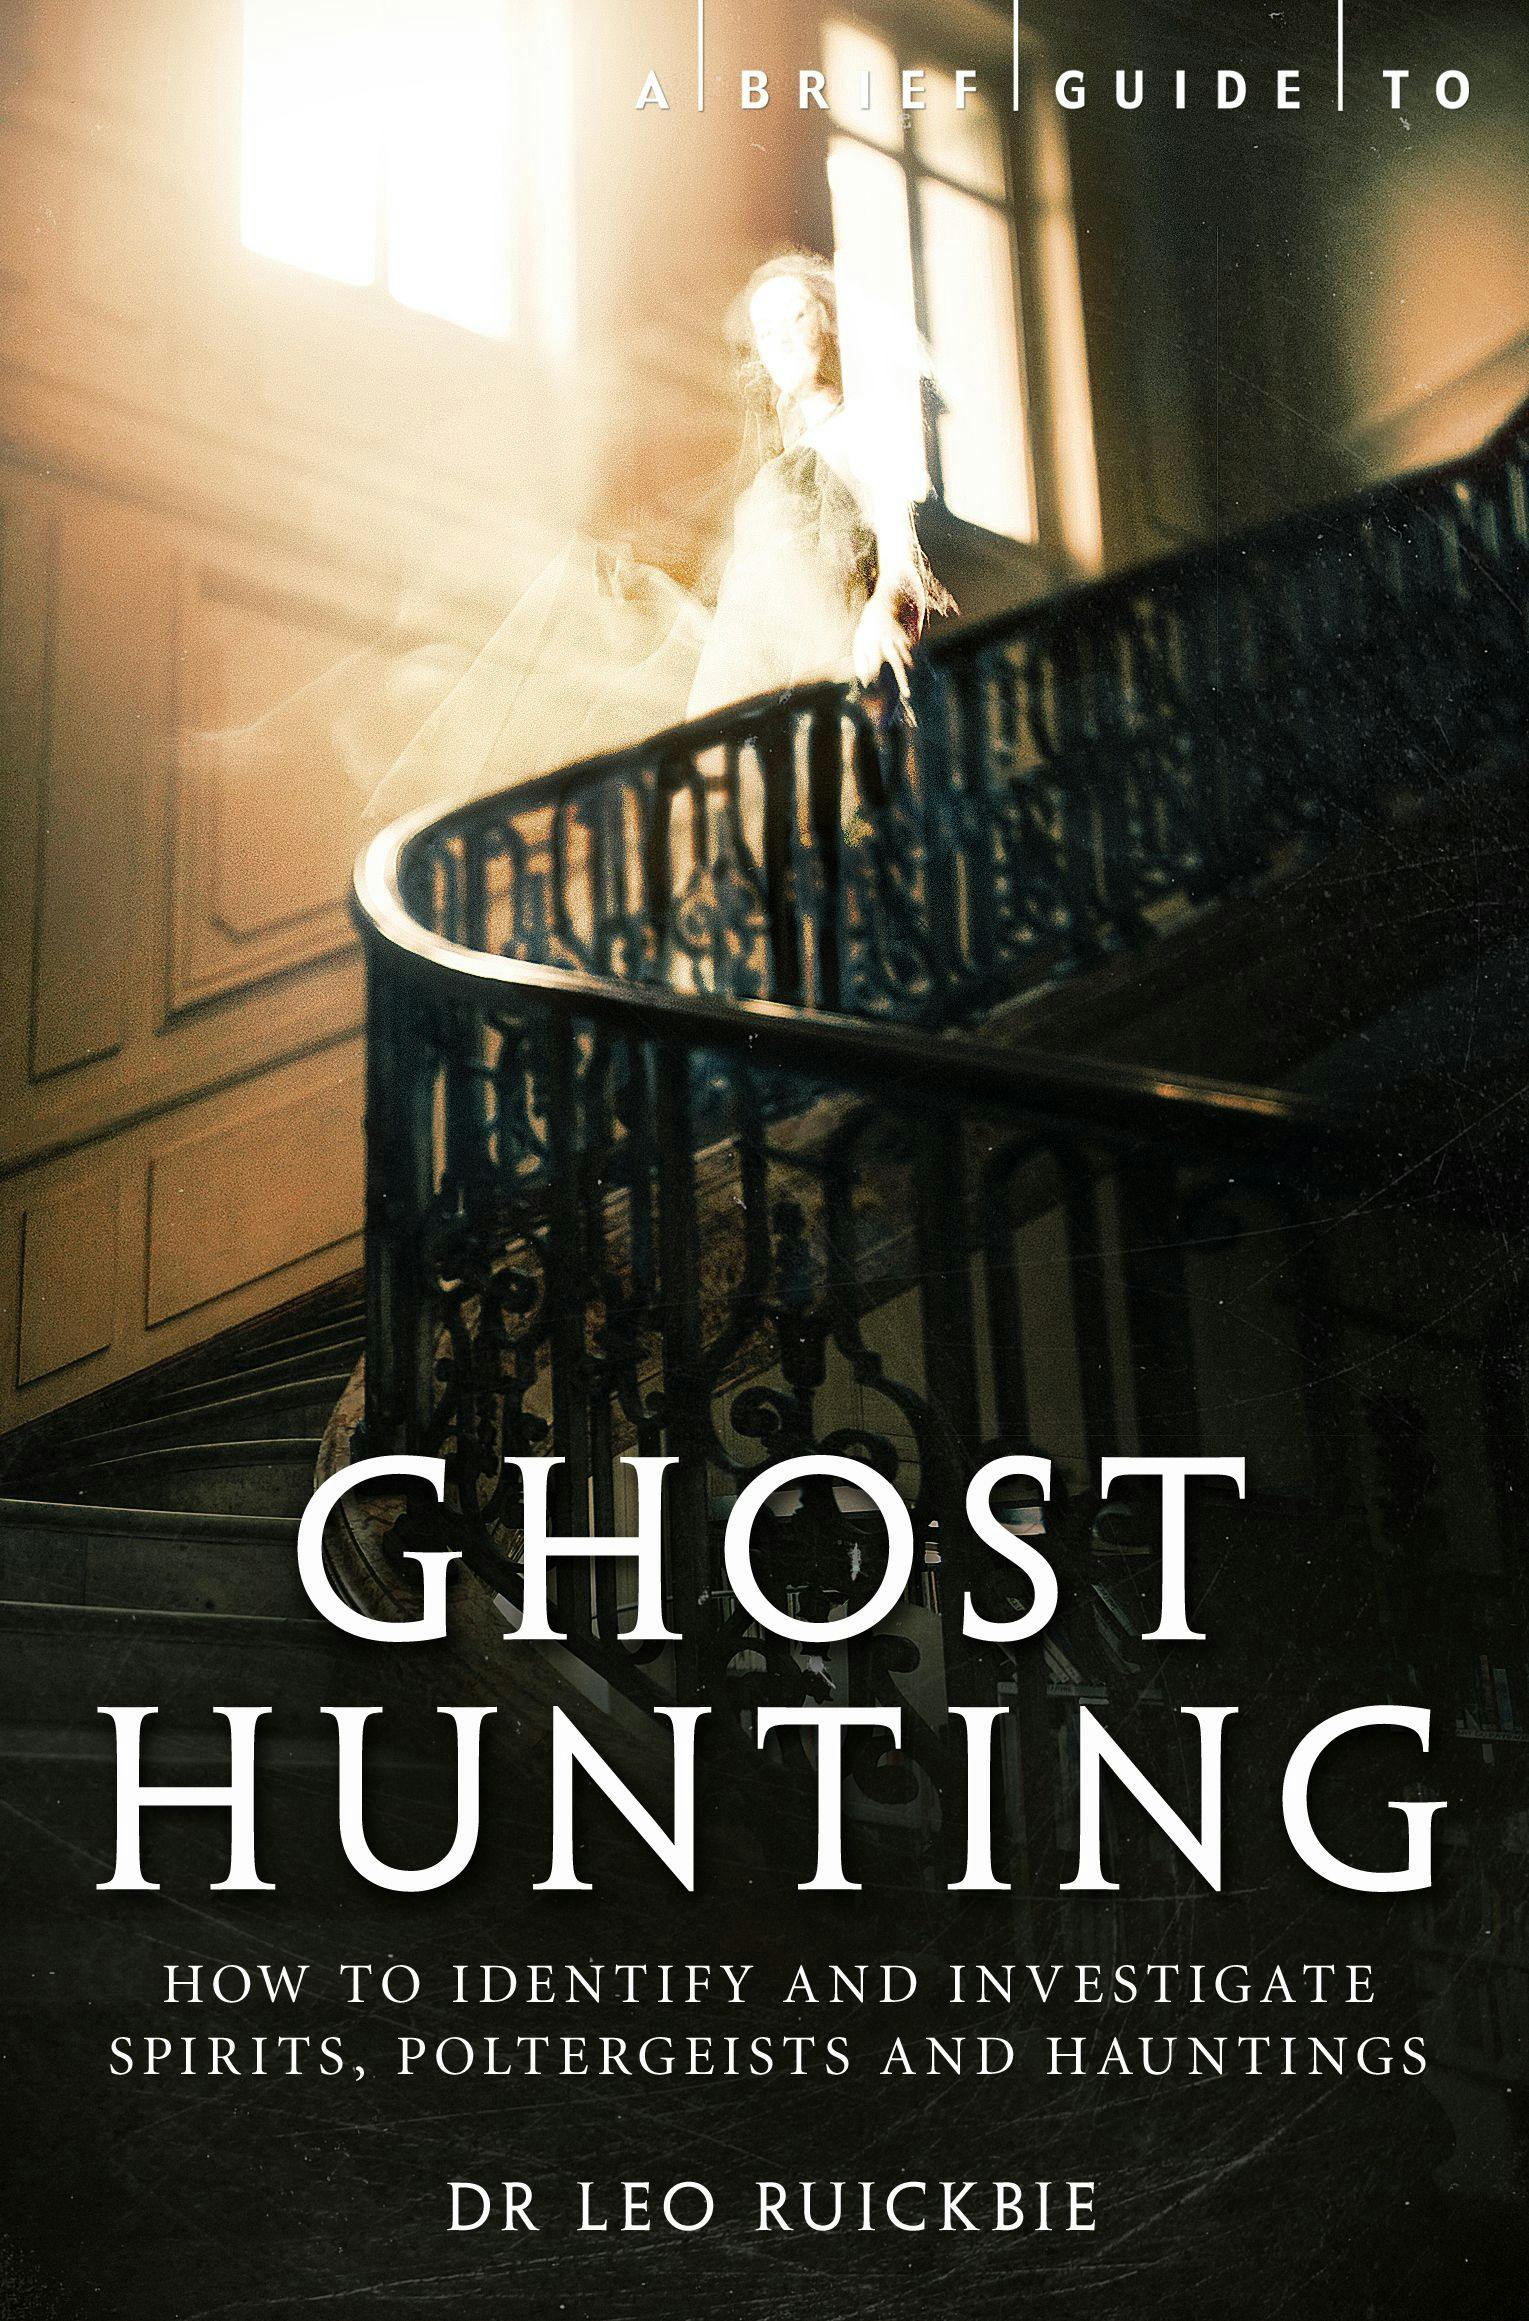 everything ghost hunting book